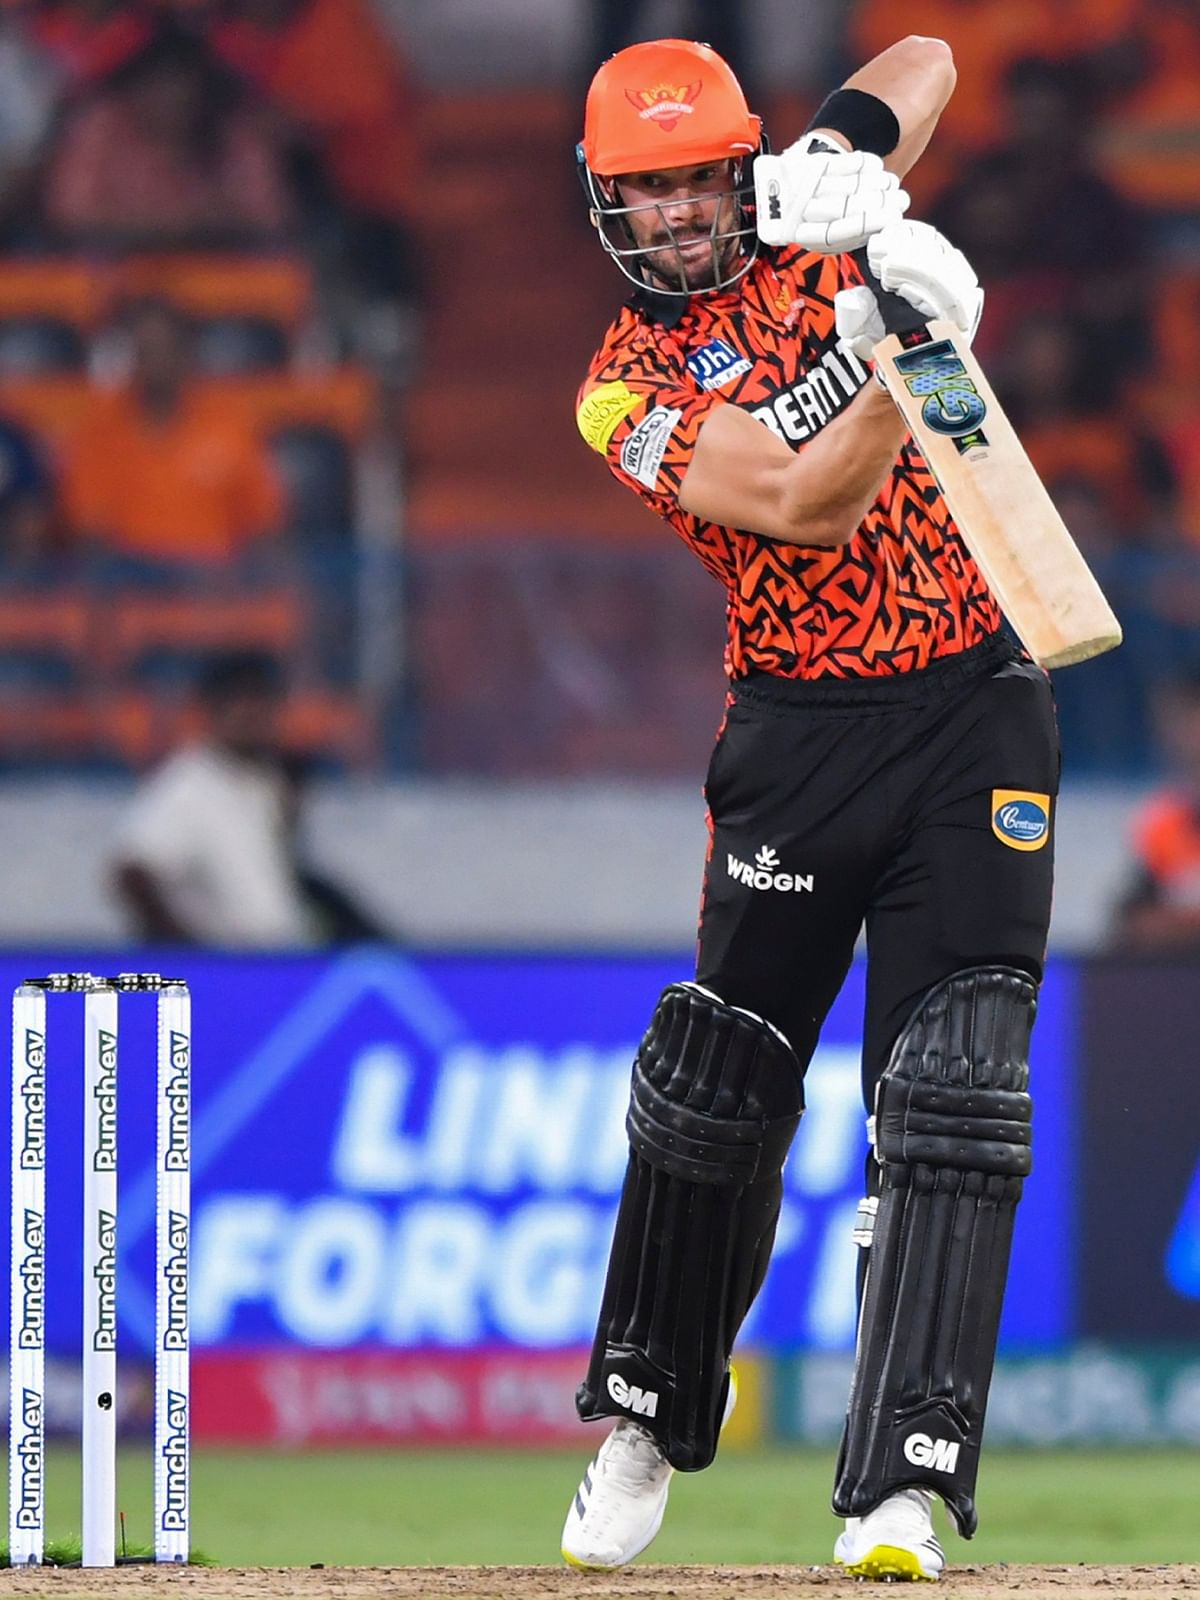 At a strike rate of 150, Aiden Markram made an unbeaten 42 helping SRH to post the mamoth total of 277-3, the highest-ever Indian Premier League total.